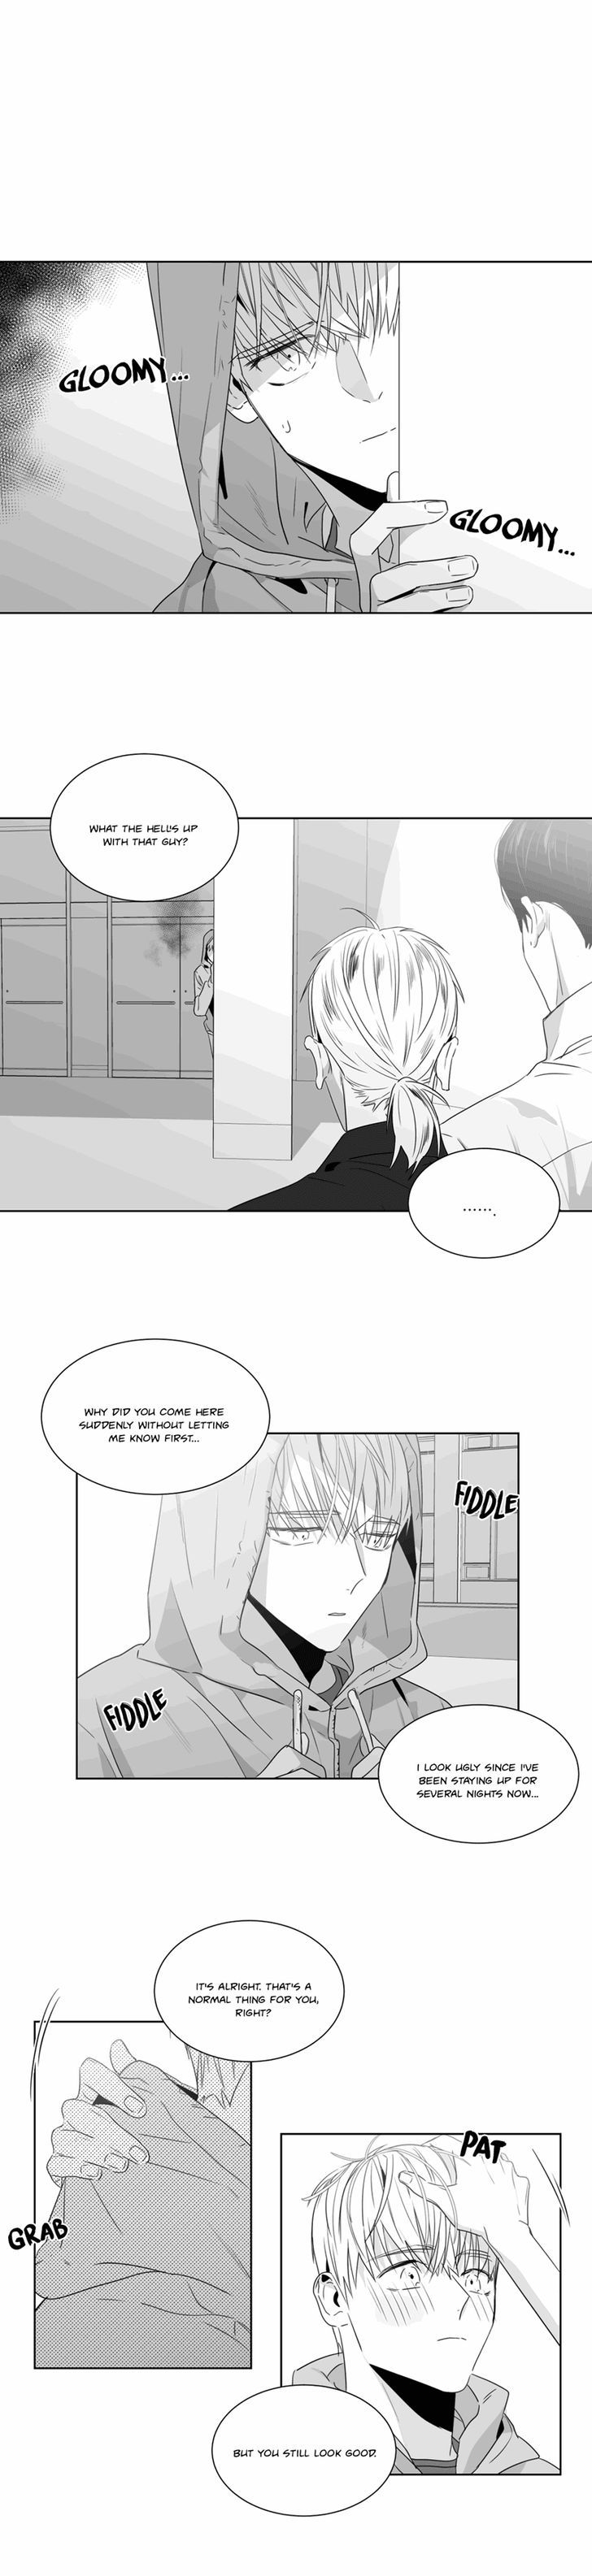 Lover Boy (Lezhin) Chapter 038 page 5